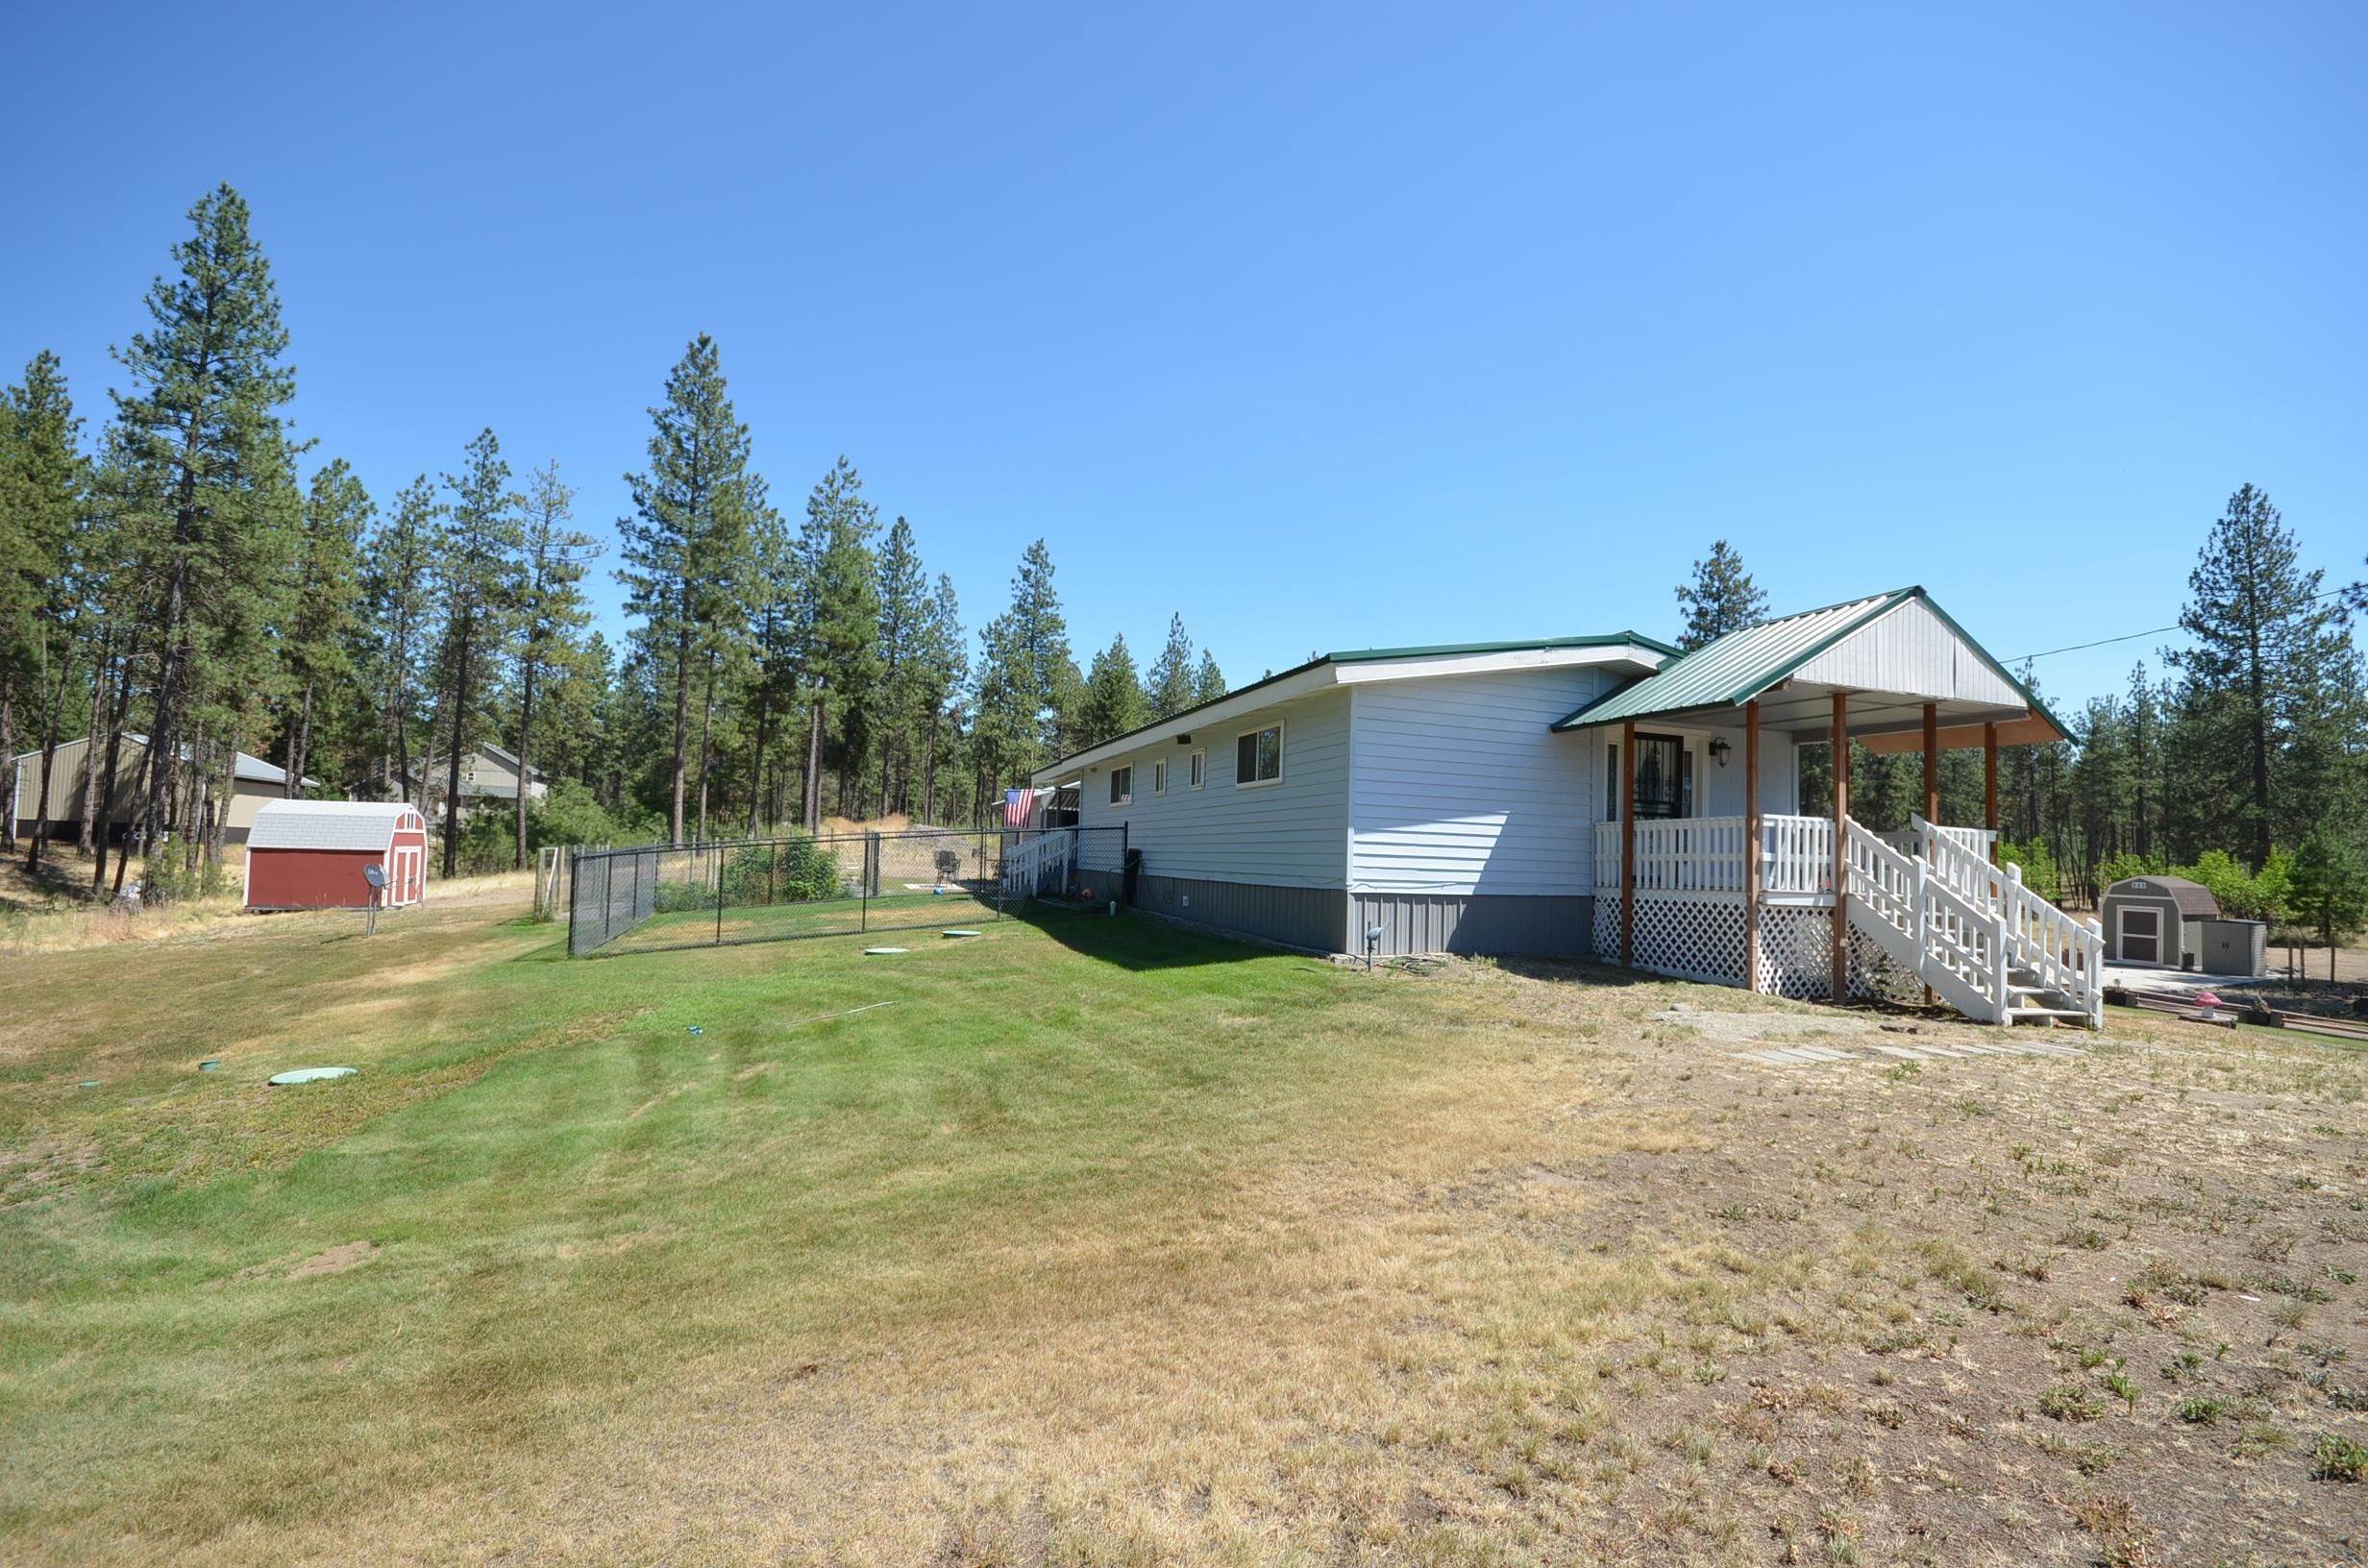 20. Single Family Homes for Sale at 2213 S Ritchey Road Medical Lake, Washington 99022 United States